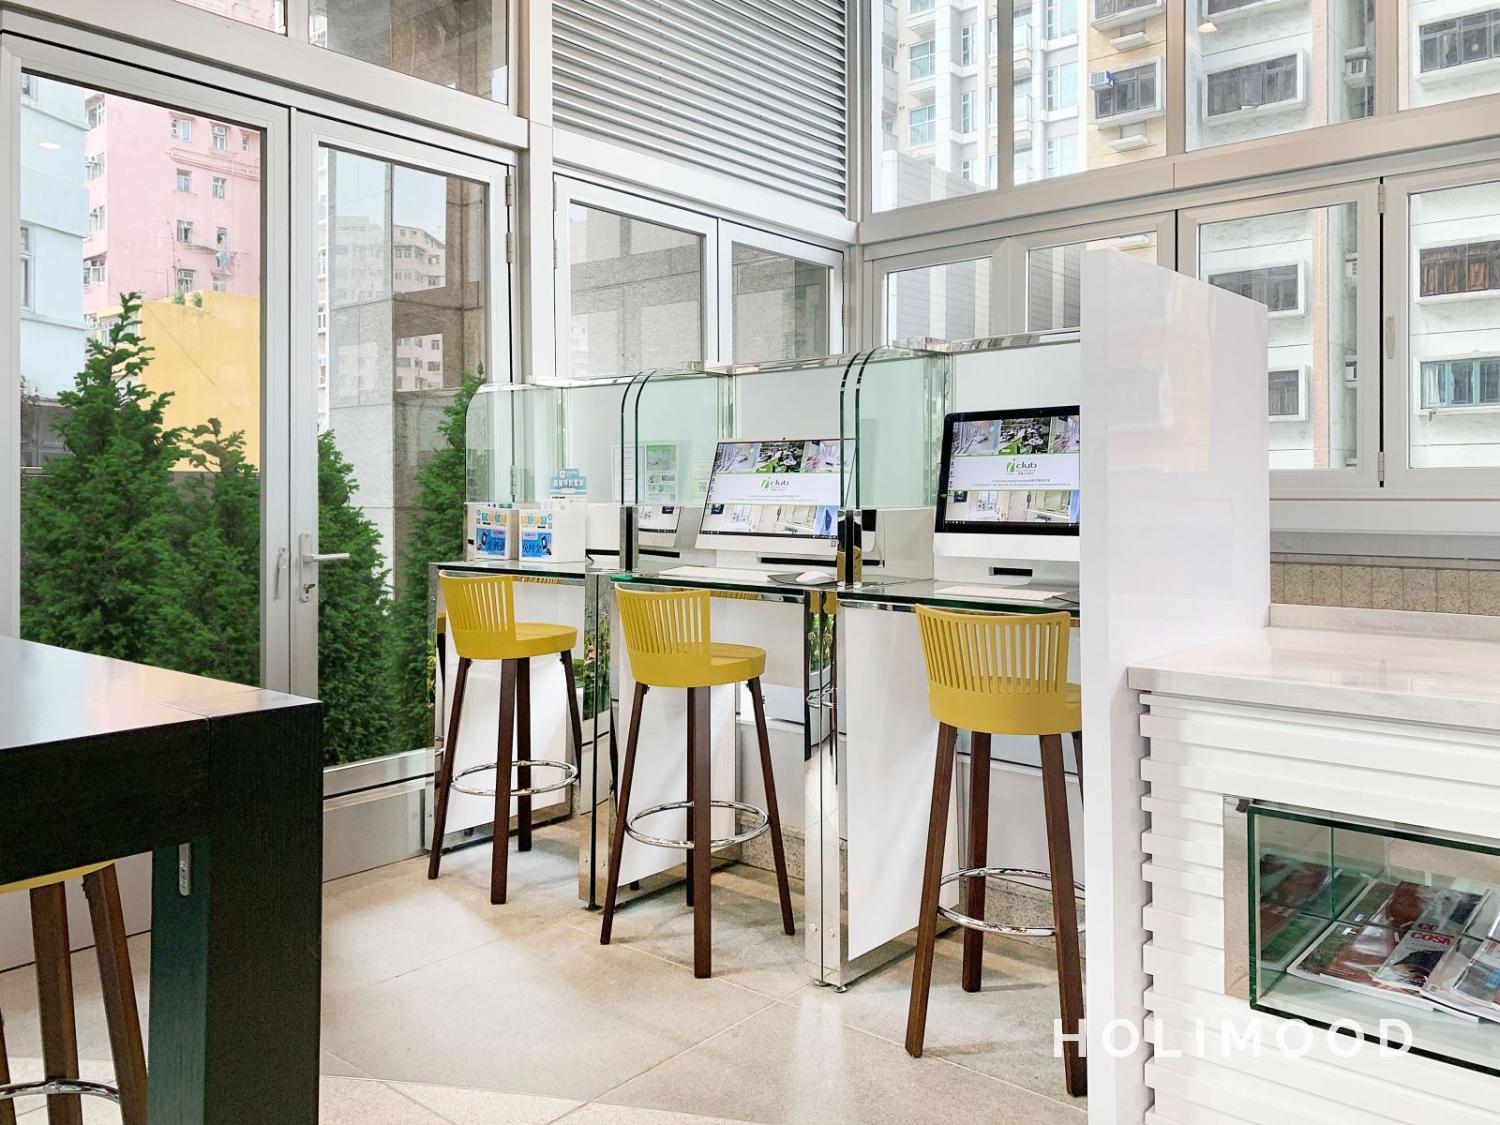 iclub Mong Kok Hotel 【iGather Room Package】iSelect / iPlus Room + Continental Breakfast + Late Check-out until 2pm + Complimentary Usage of the Club House Facilities｜iclub Mong Kok Hotel 7